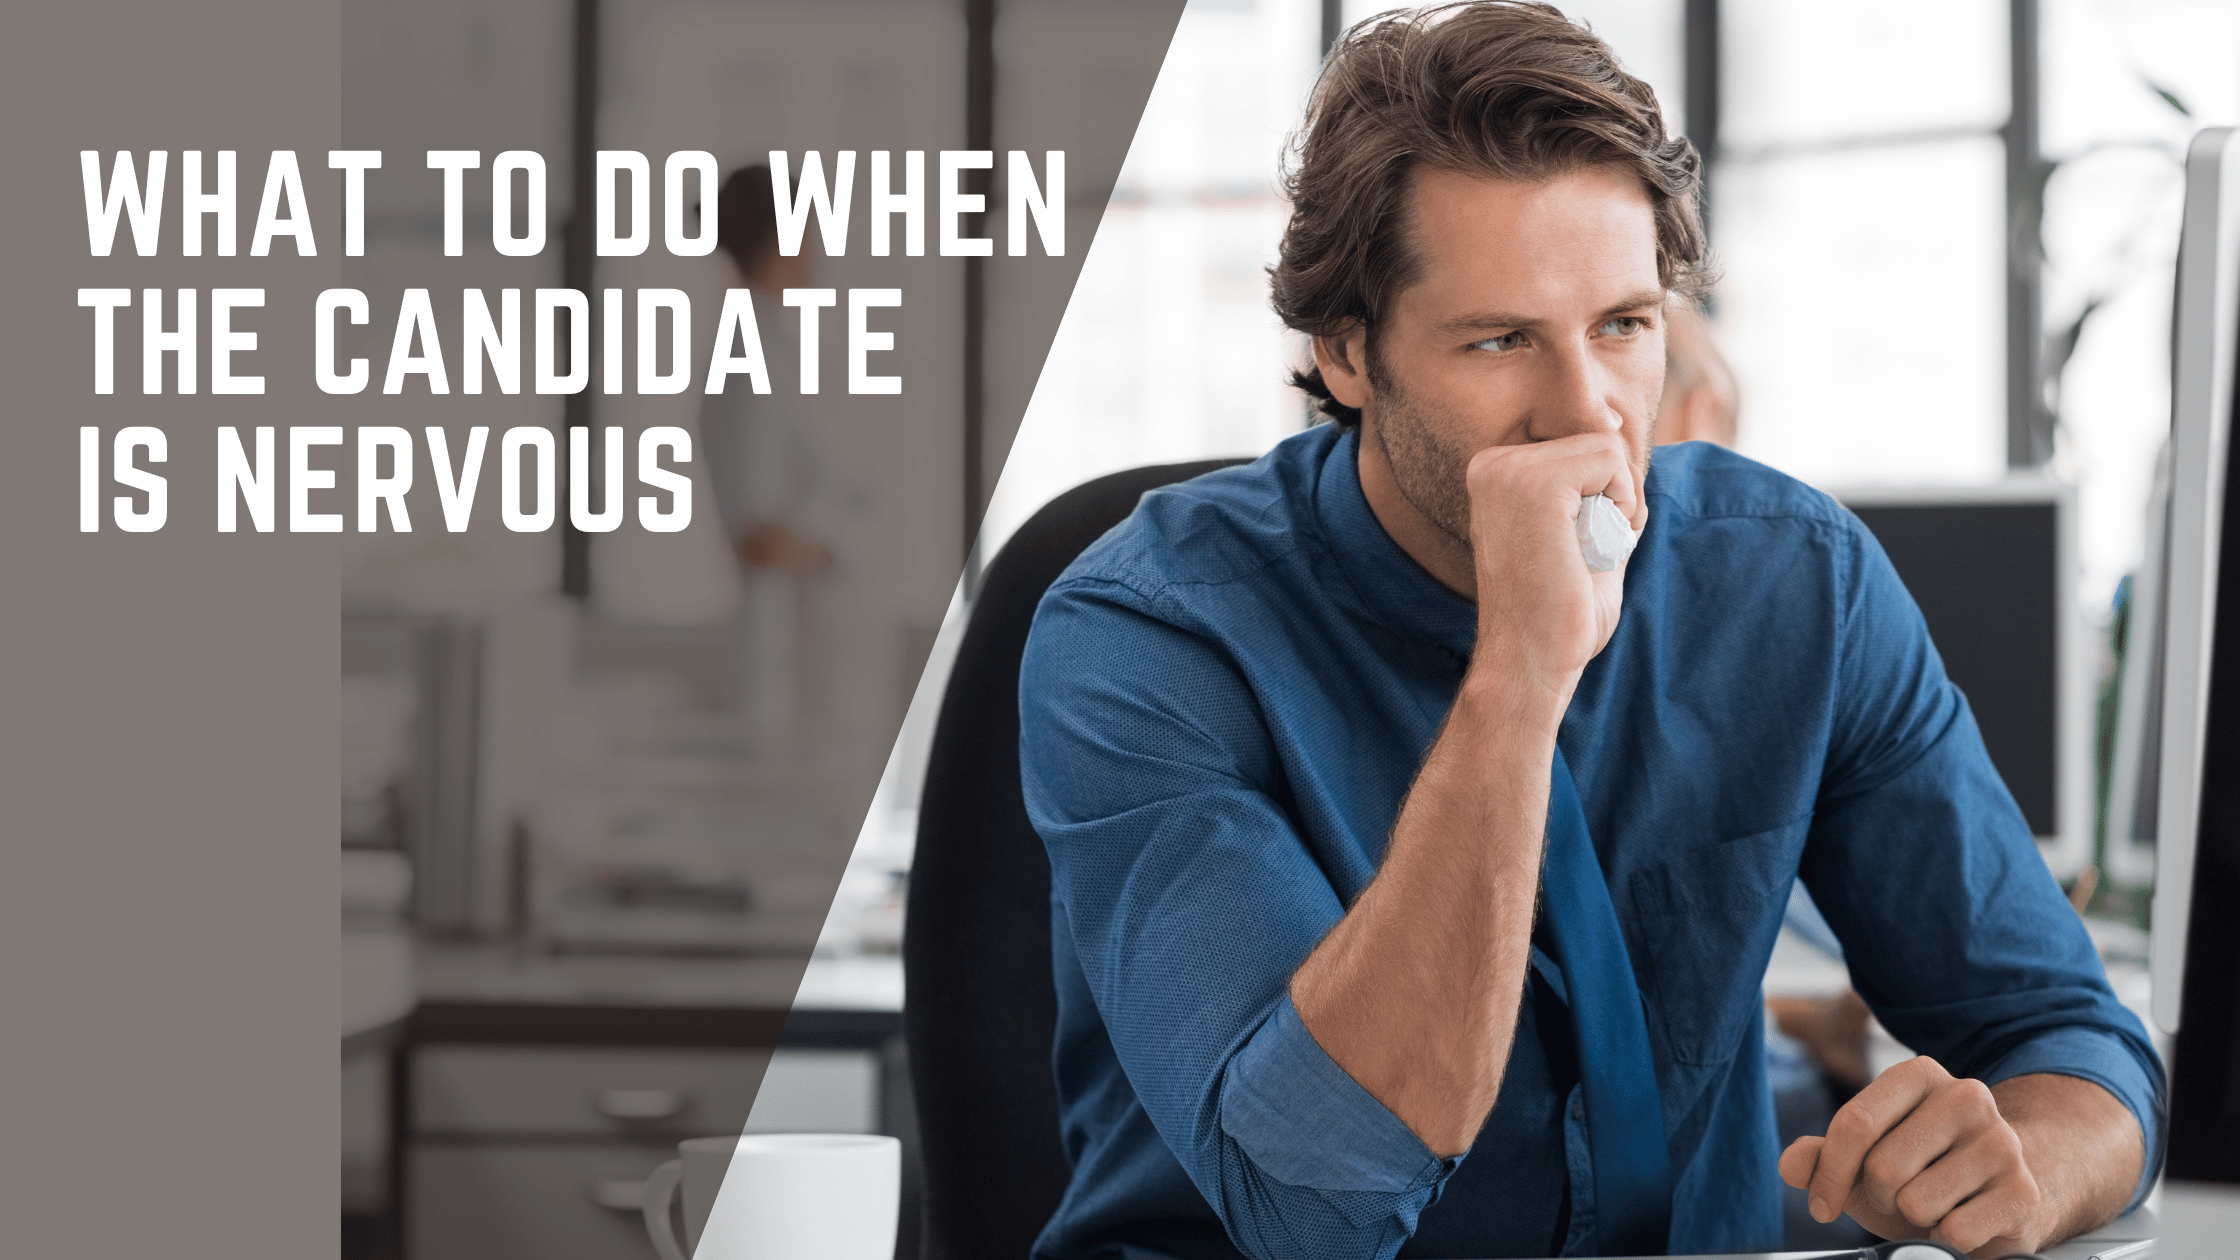 How to help candidates relaxed when nervous during an interview